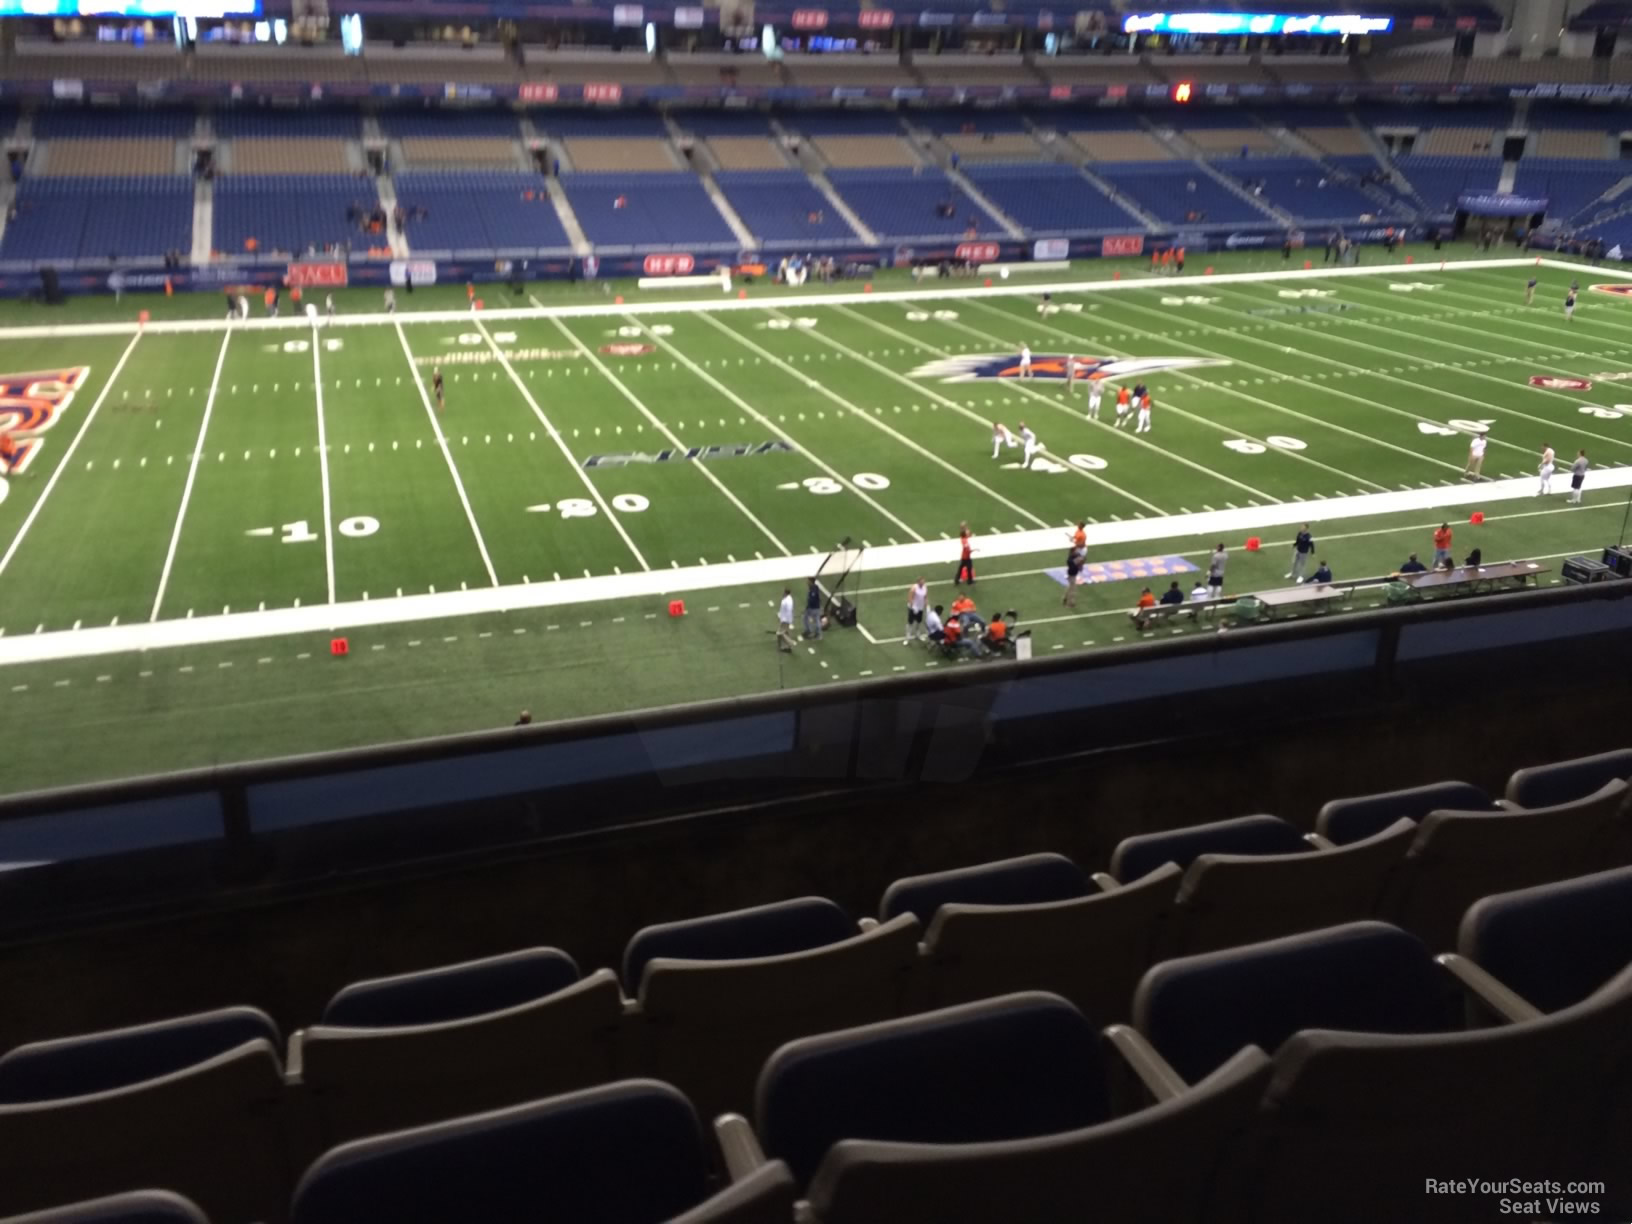 section 215, row 5 seat view  for football - alamodome